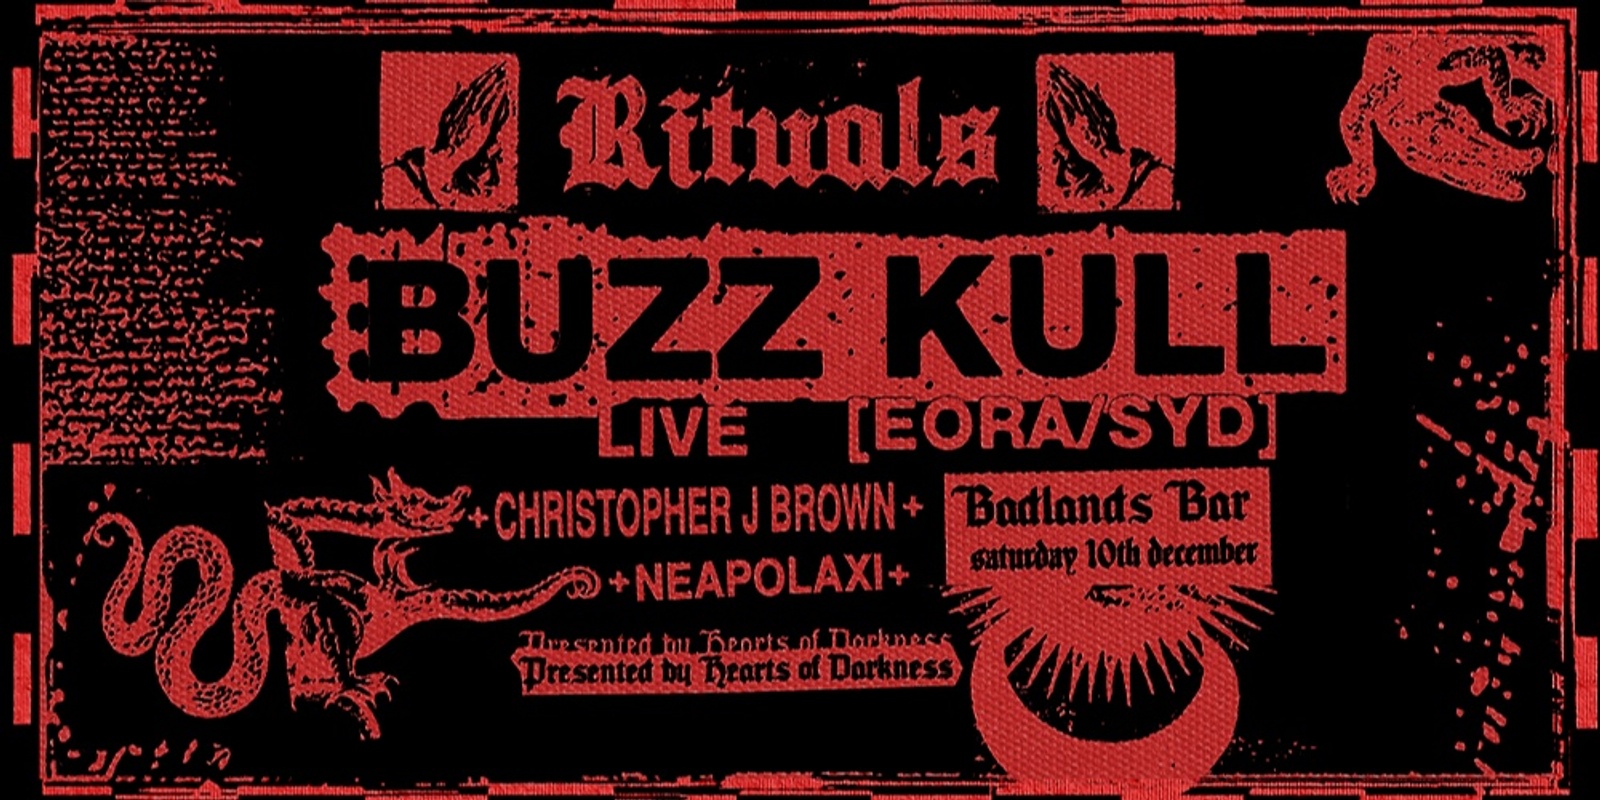 Banner image for + RITUALS ft BUZZ KULL (SYD) + CHRISTOPHER J BROWN + NEAPOLAXI + MORE +